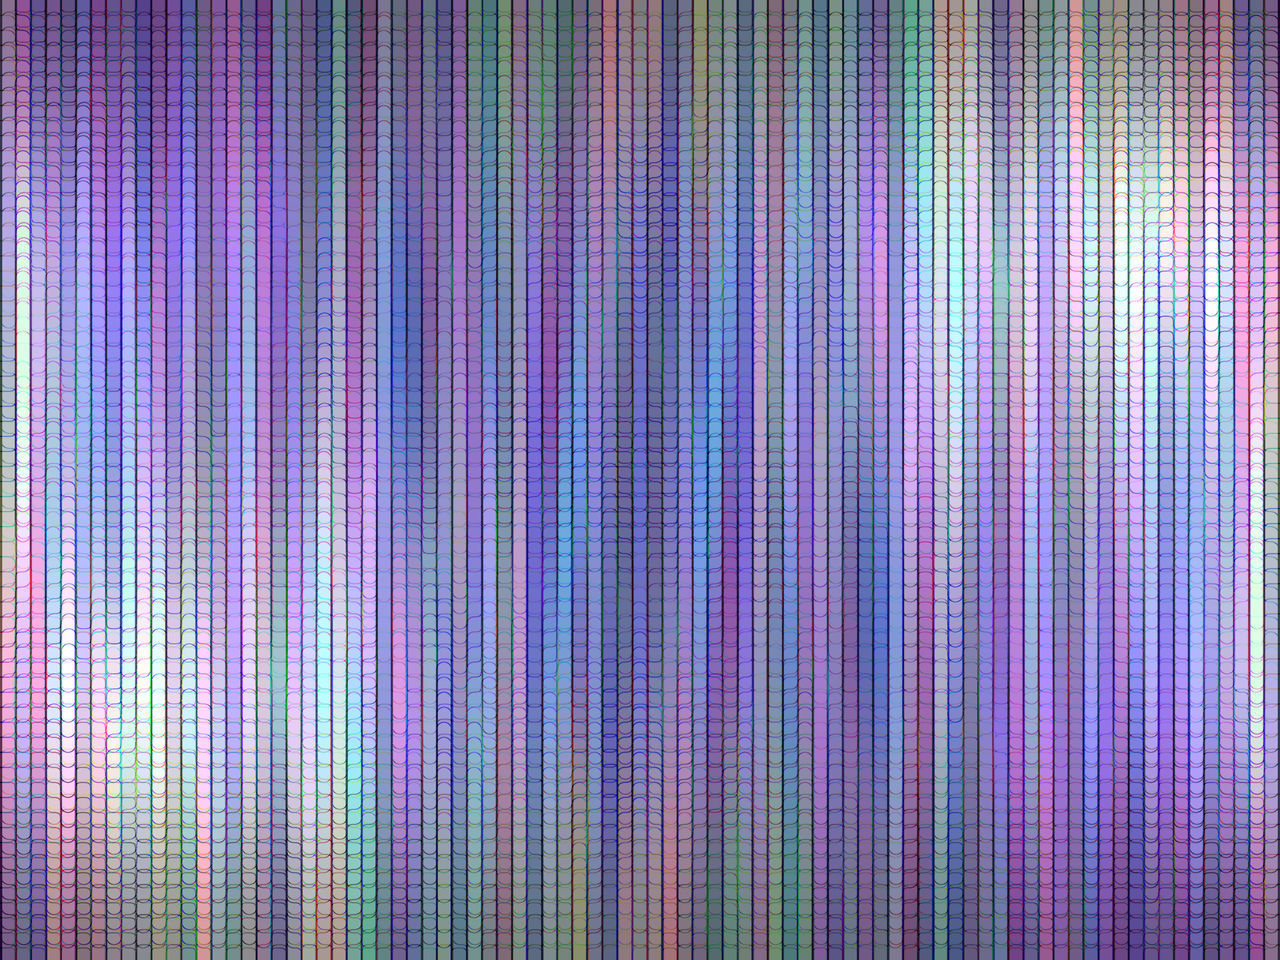 FULL FRAME SHOT OF MULTI COLORED ABSTRACT PATTERN